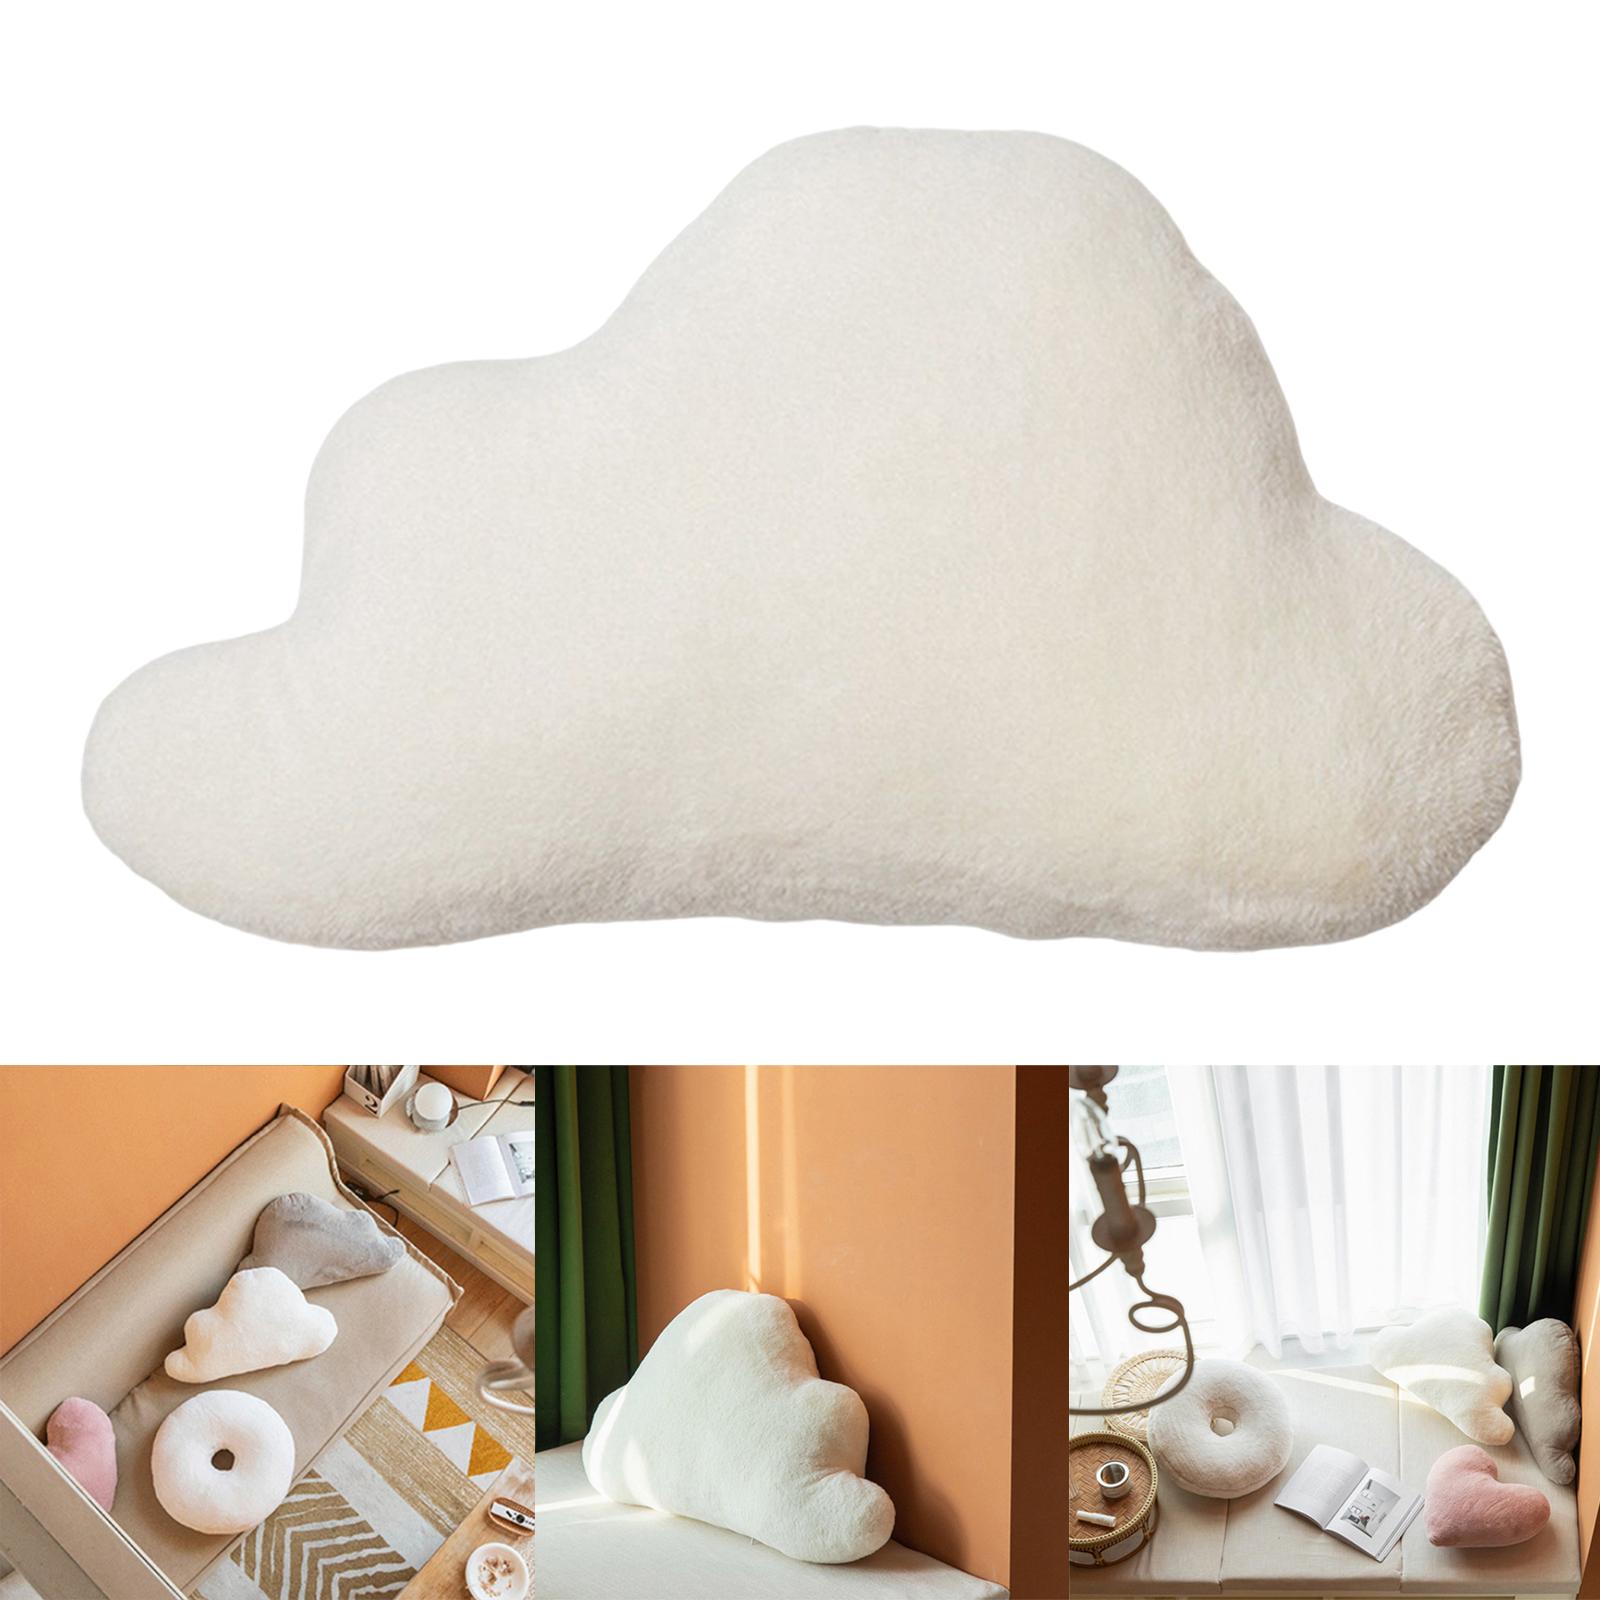 Plush Throw Pillows Filled Cute Decorative Pillow for Couch Bed White Clouds